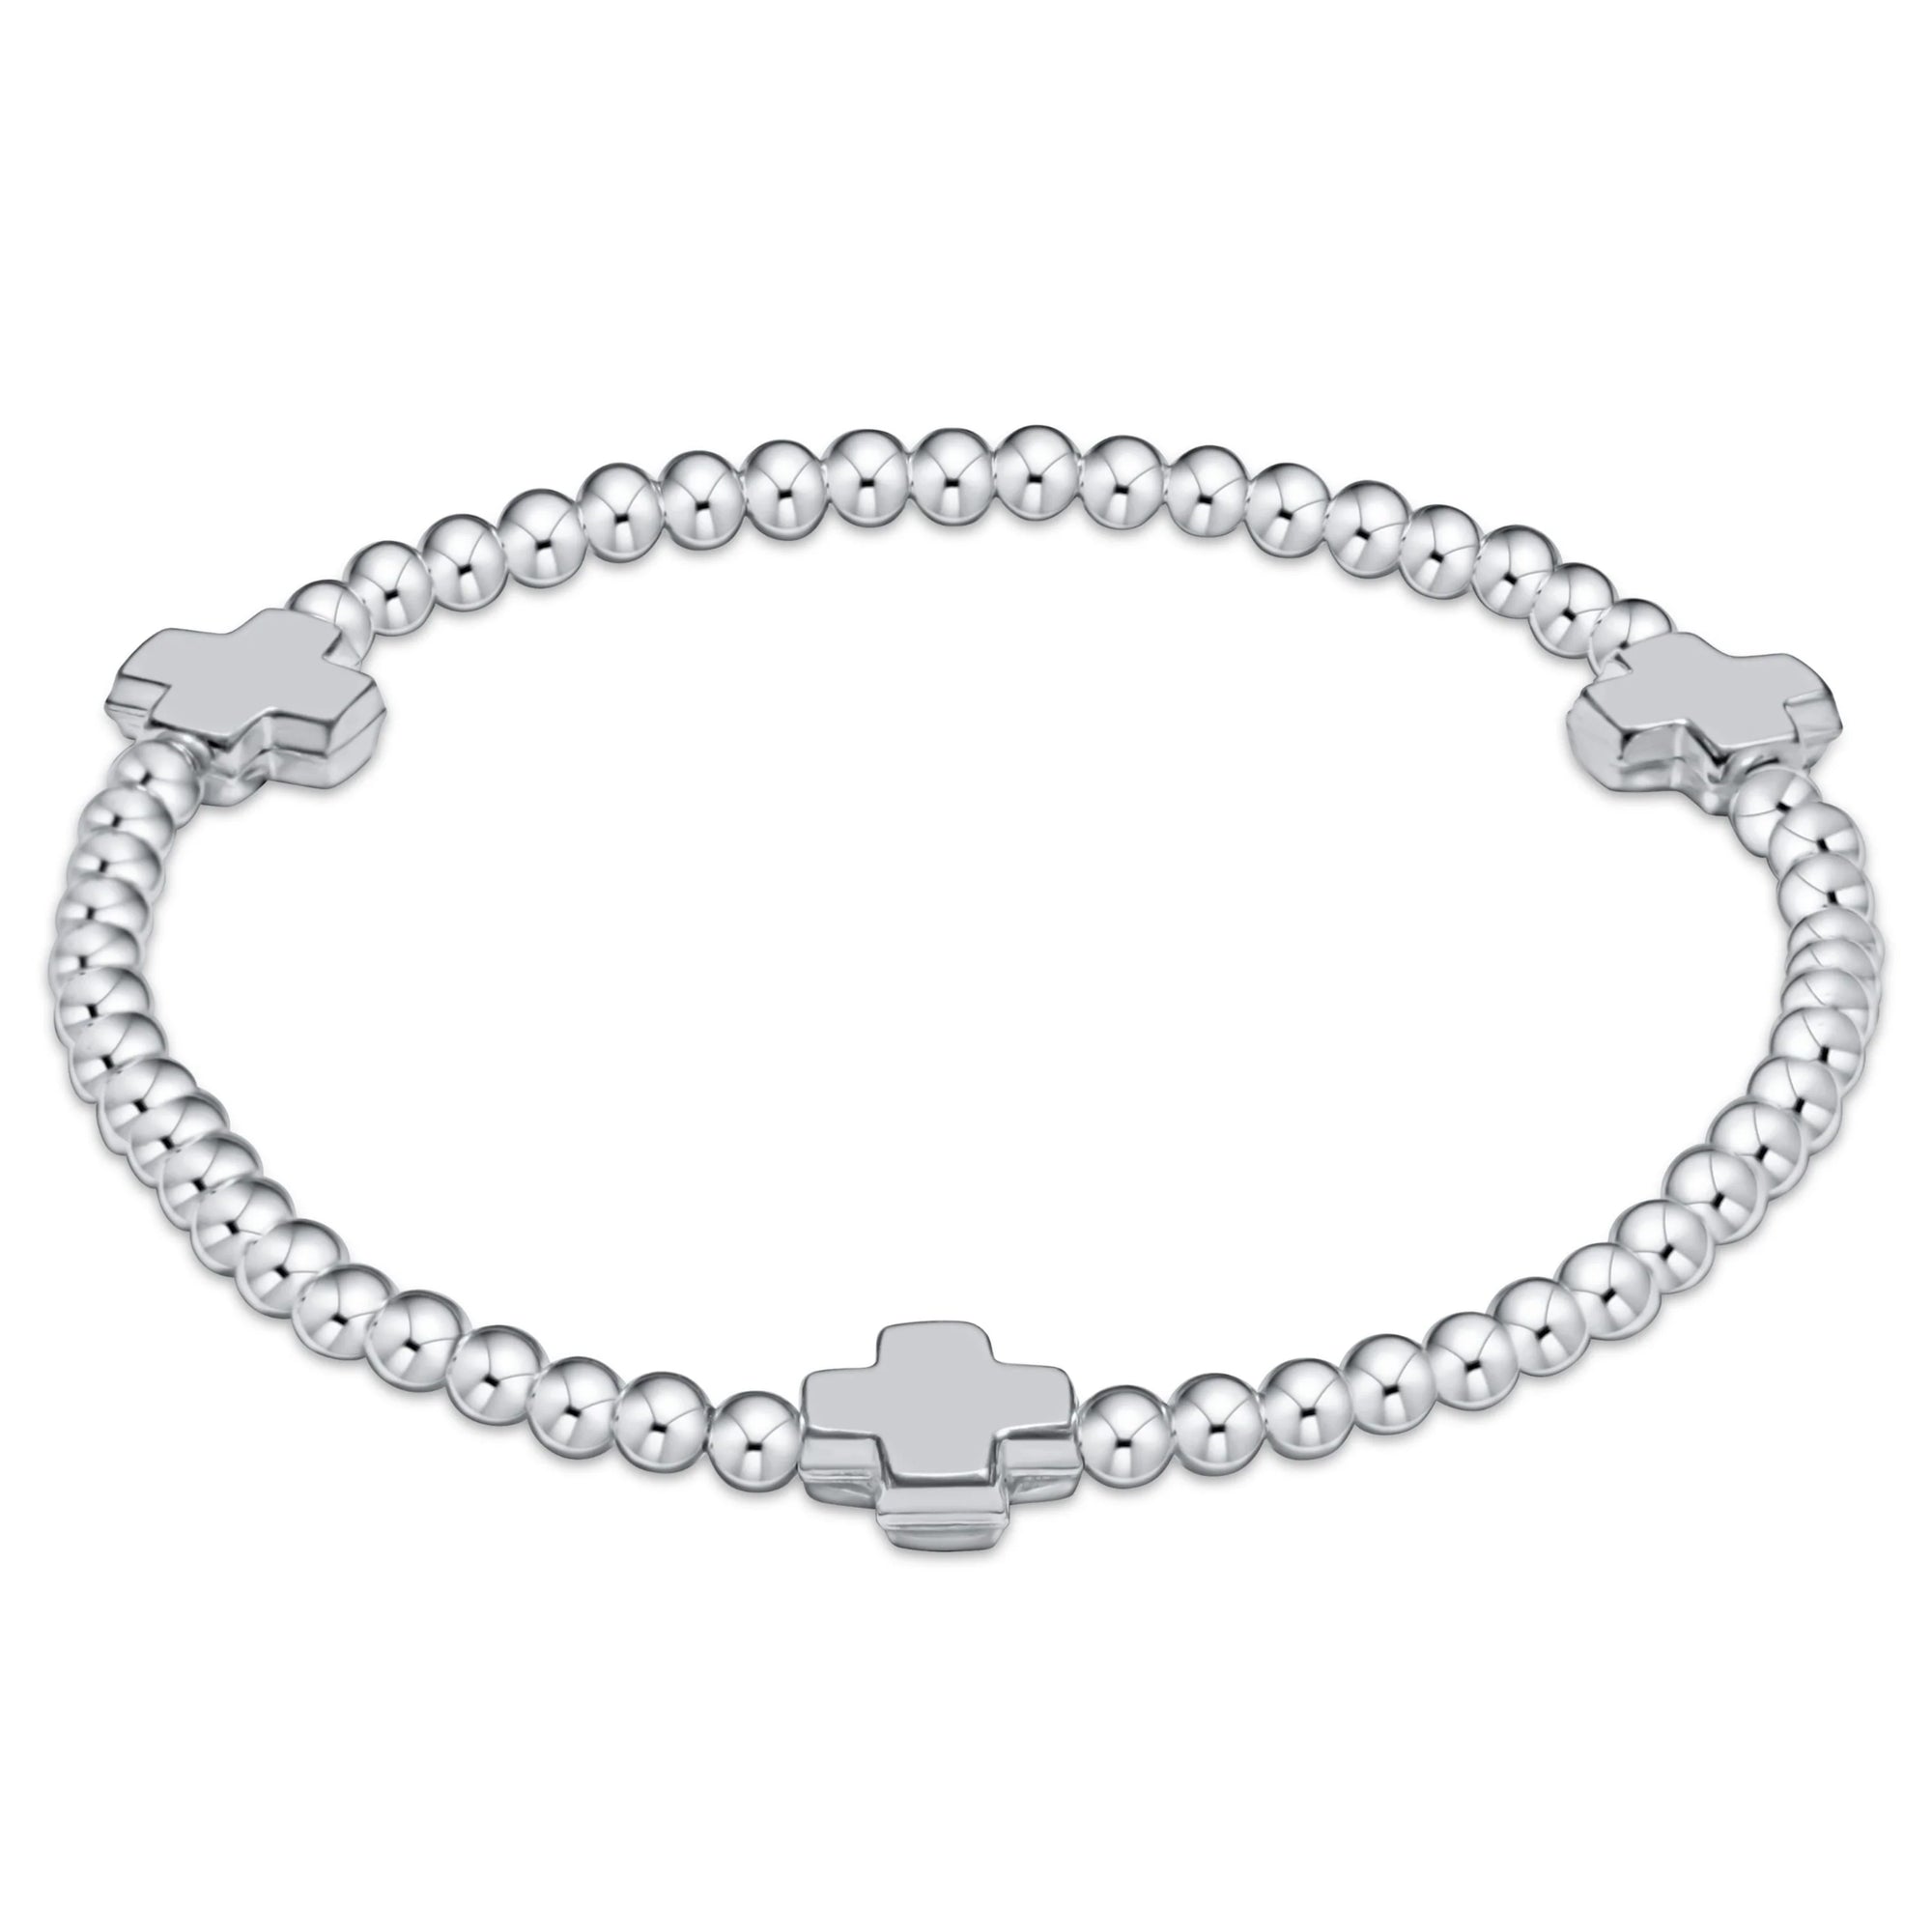 Signature Cross Sterling Silver 3mm Bead Bracelet - Extended Size